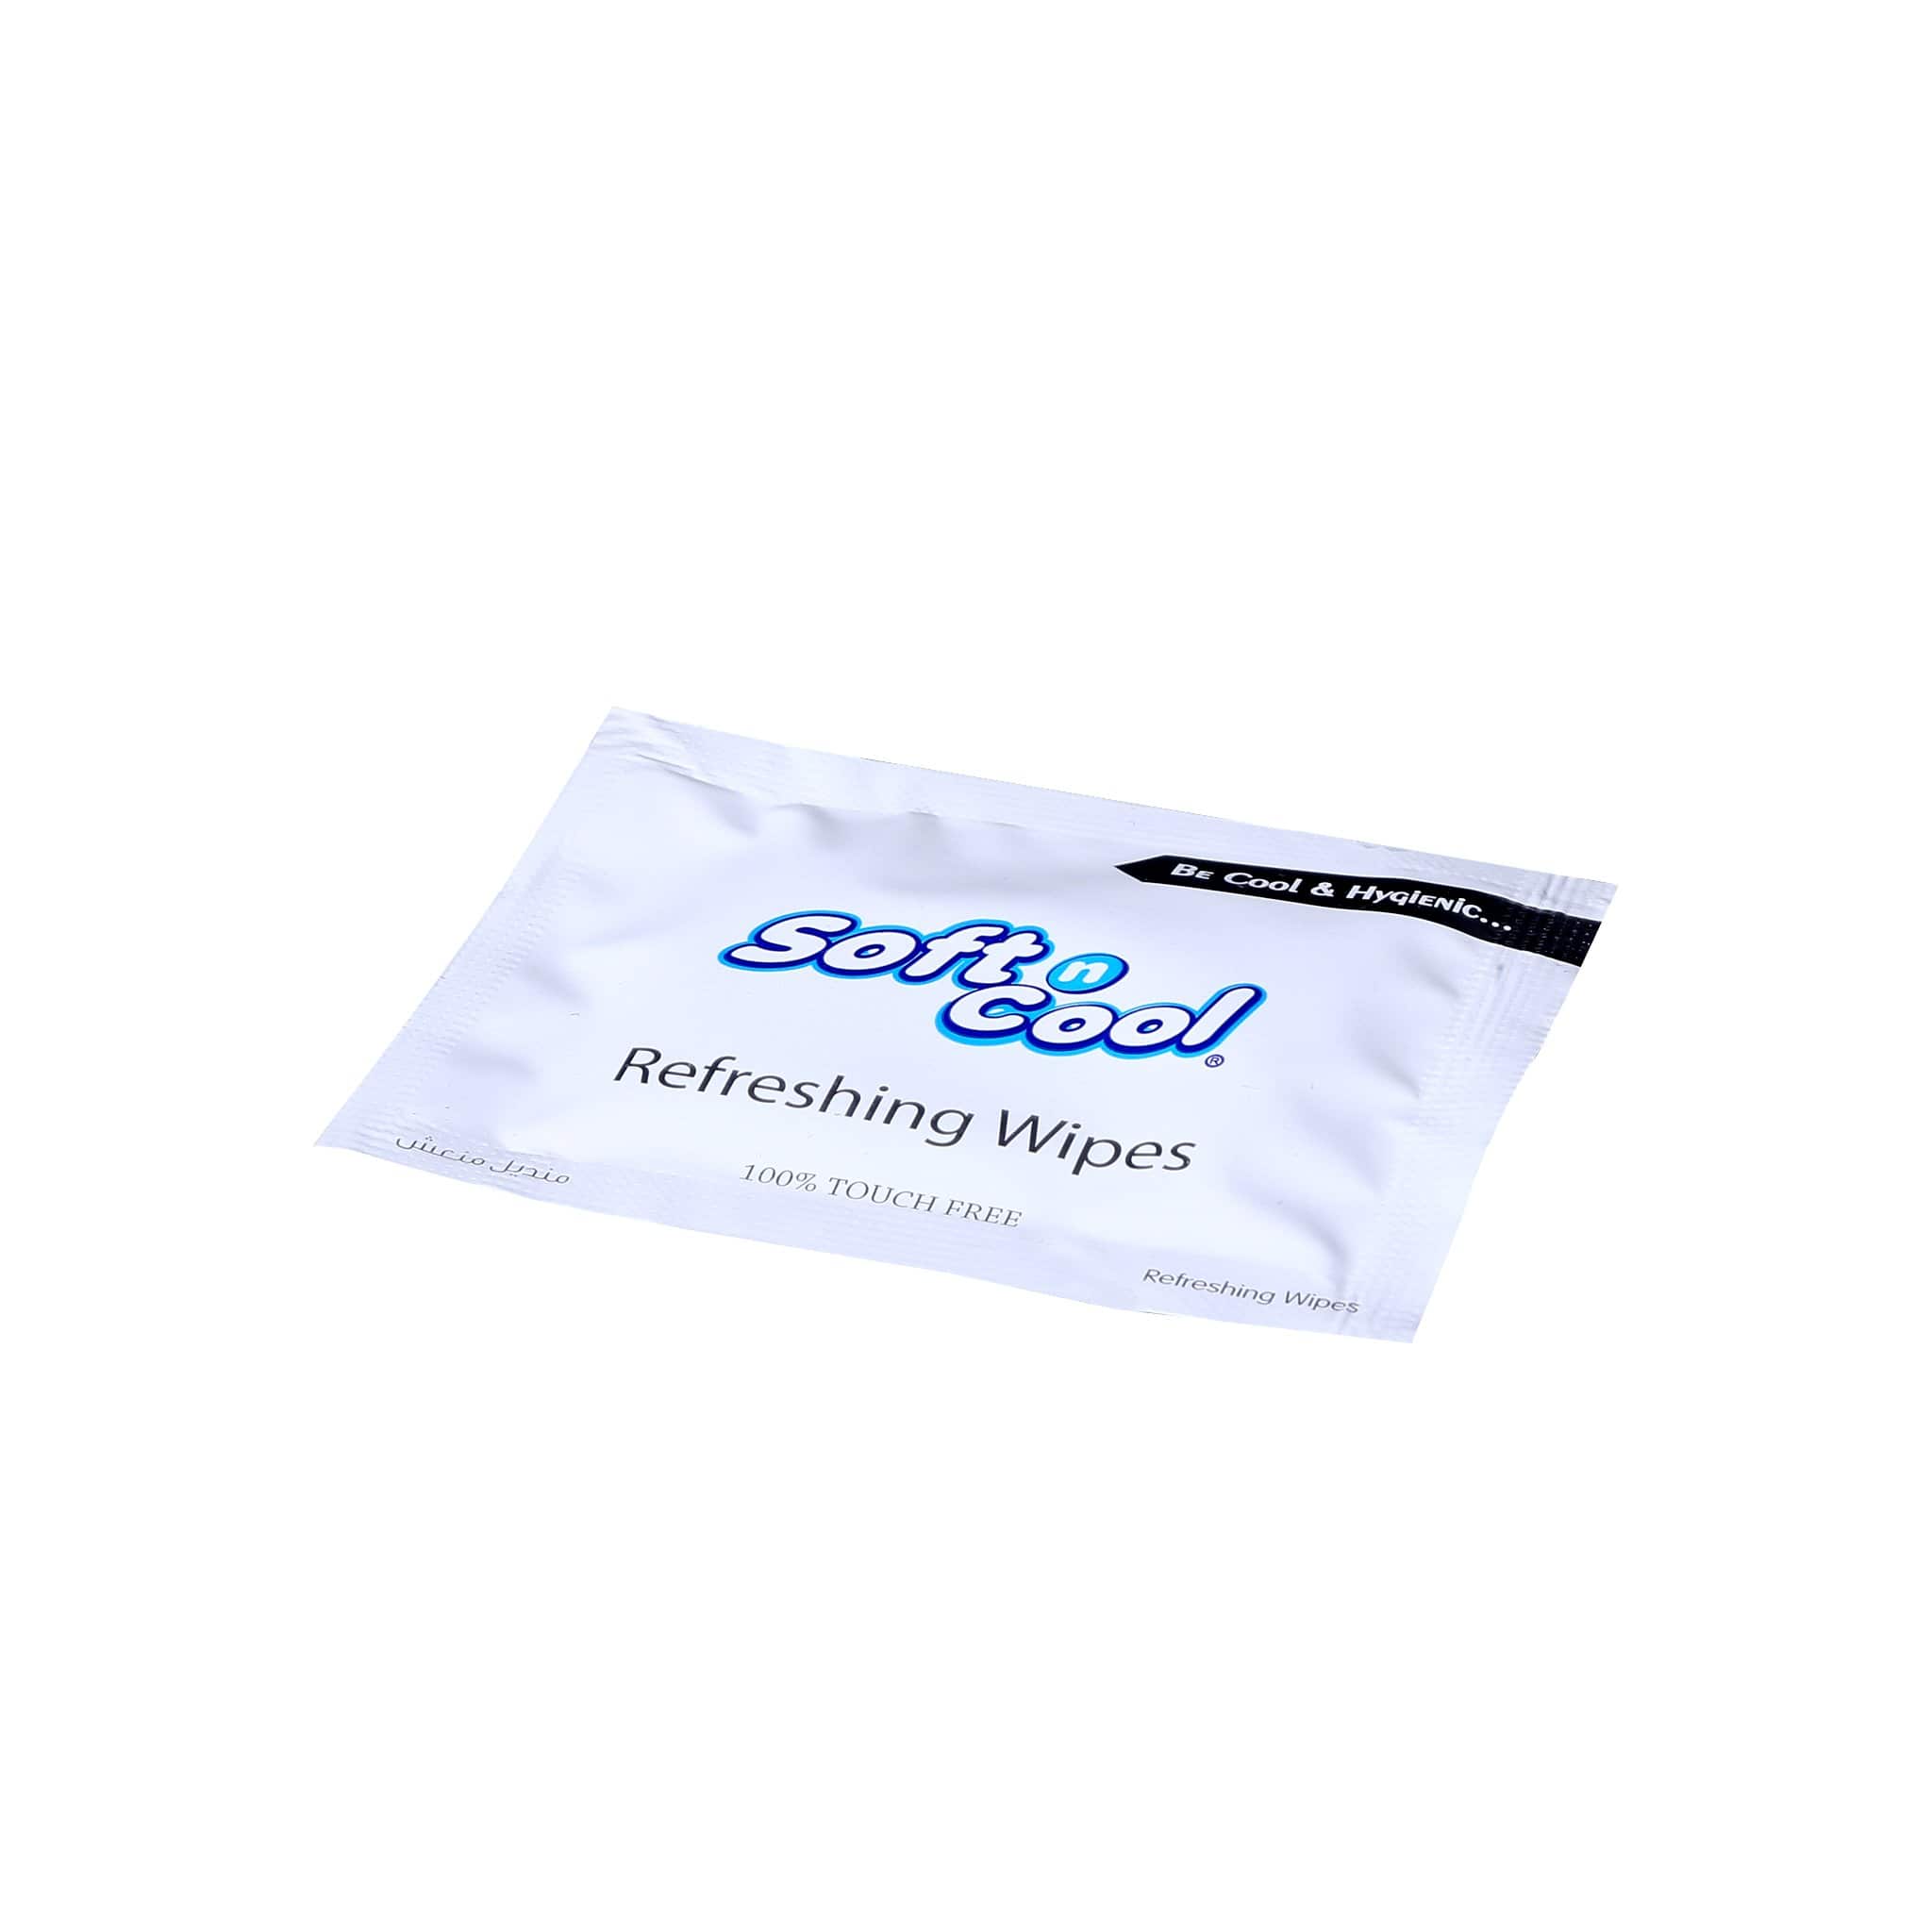 Soft Cool Facial Tissues 2 Ply 200 Sheets White Tissue 5 Boxes with 25 Pieces Refreshing Wet Wipes Free - hotpackwebstore.com